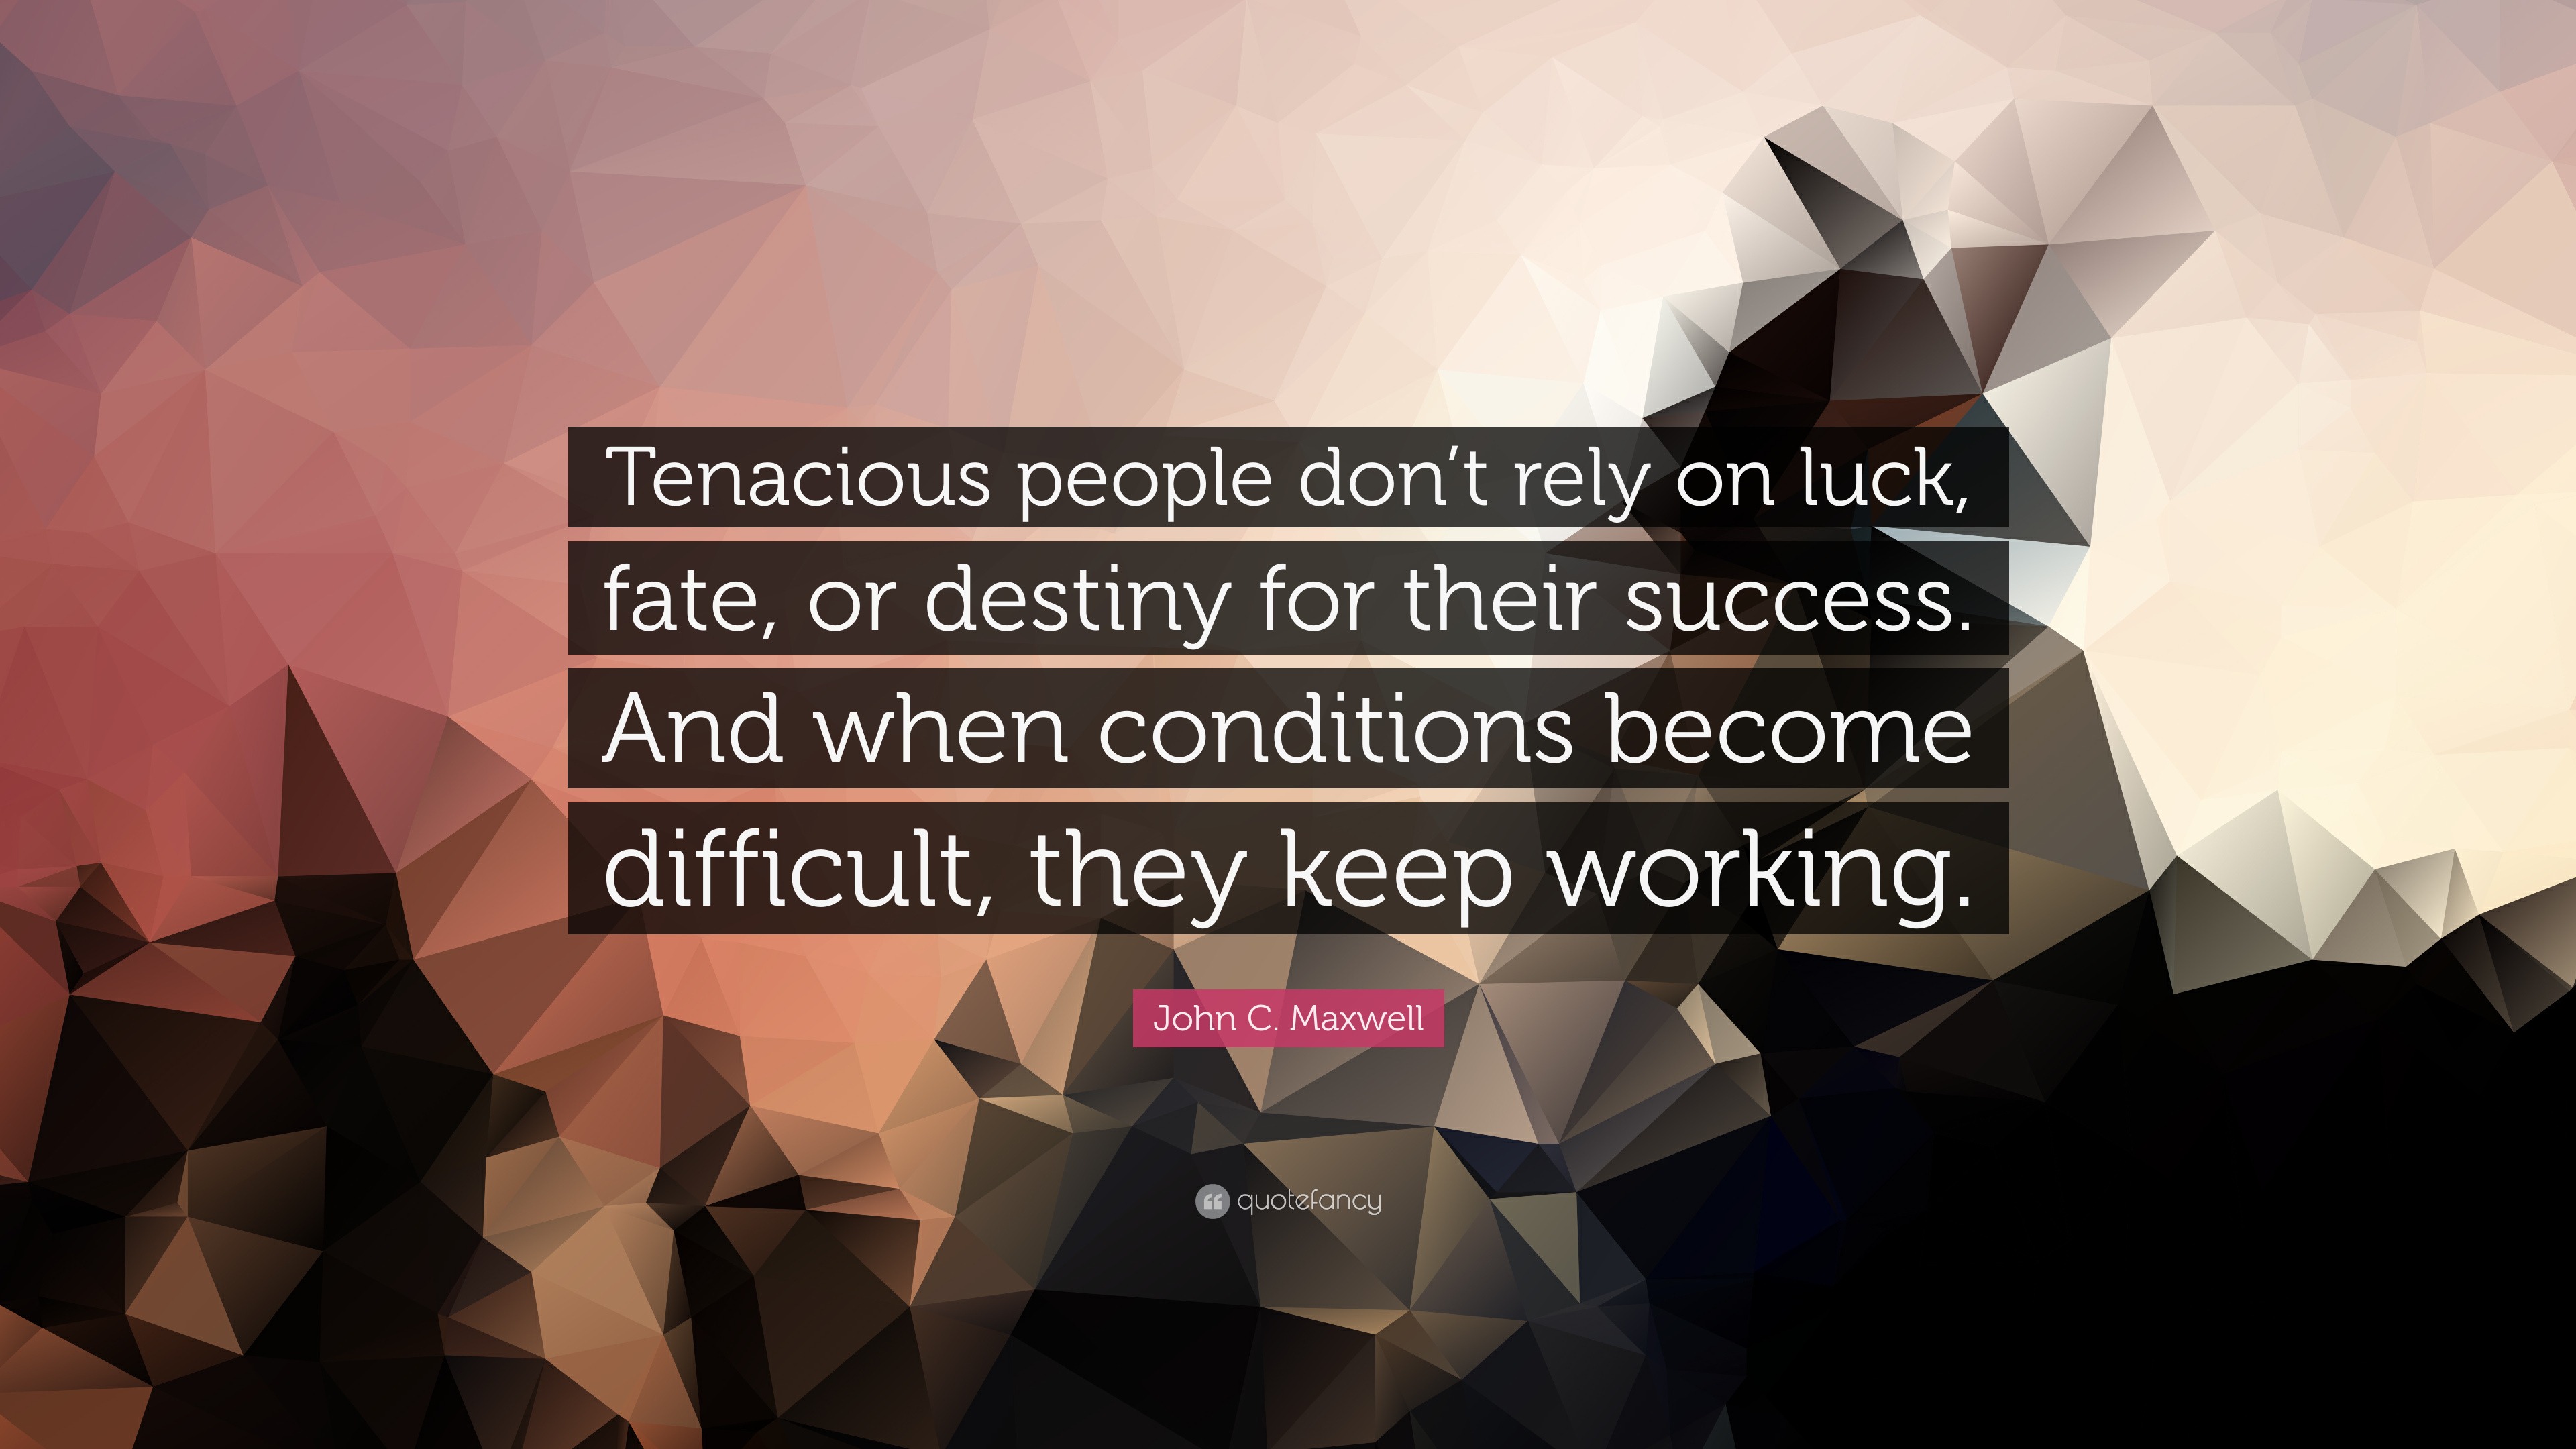 https://quotefancy.com/media/wallpaper/3840x2160/2104394-John-C-Maxwell-Quote-Tenacious-people-don-t-rely-on-luck-fate-or.jpg